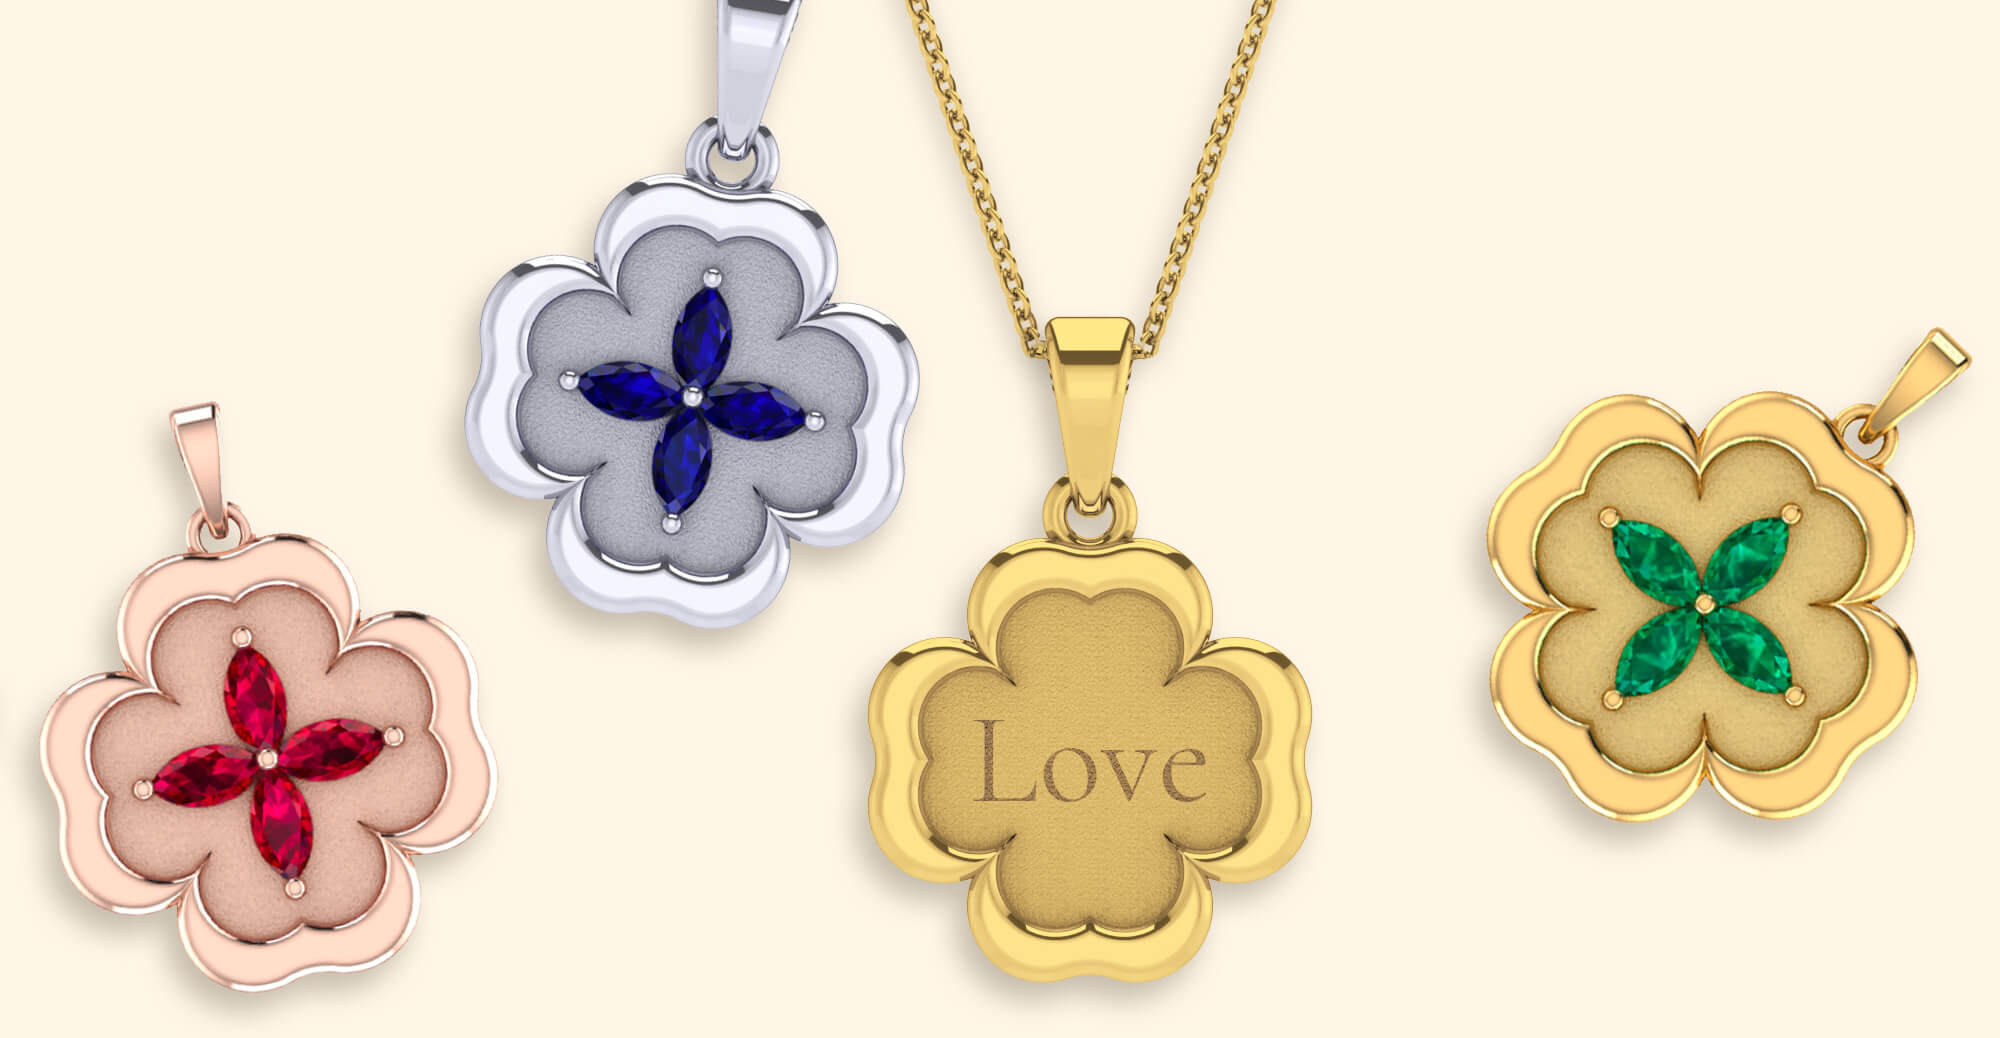 Clover shaped gold necklace with gemstone and engraving in the middle